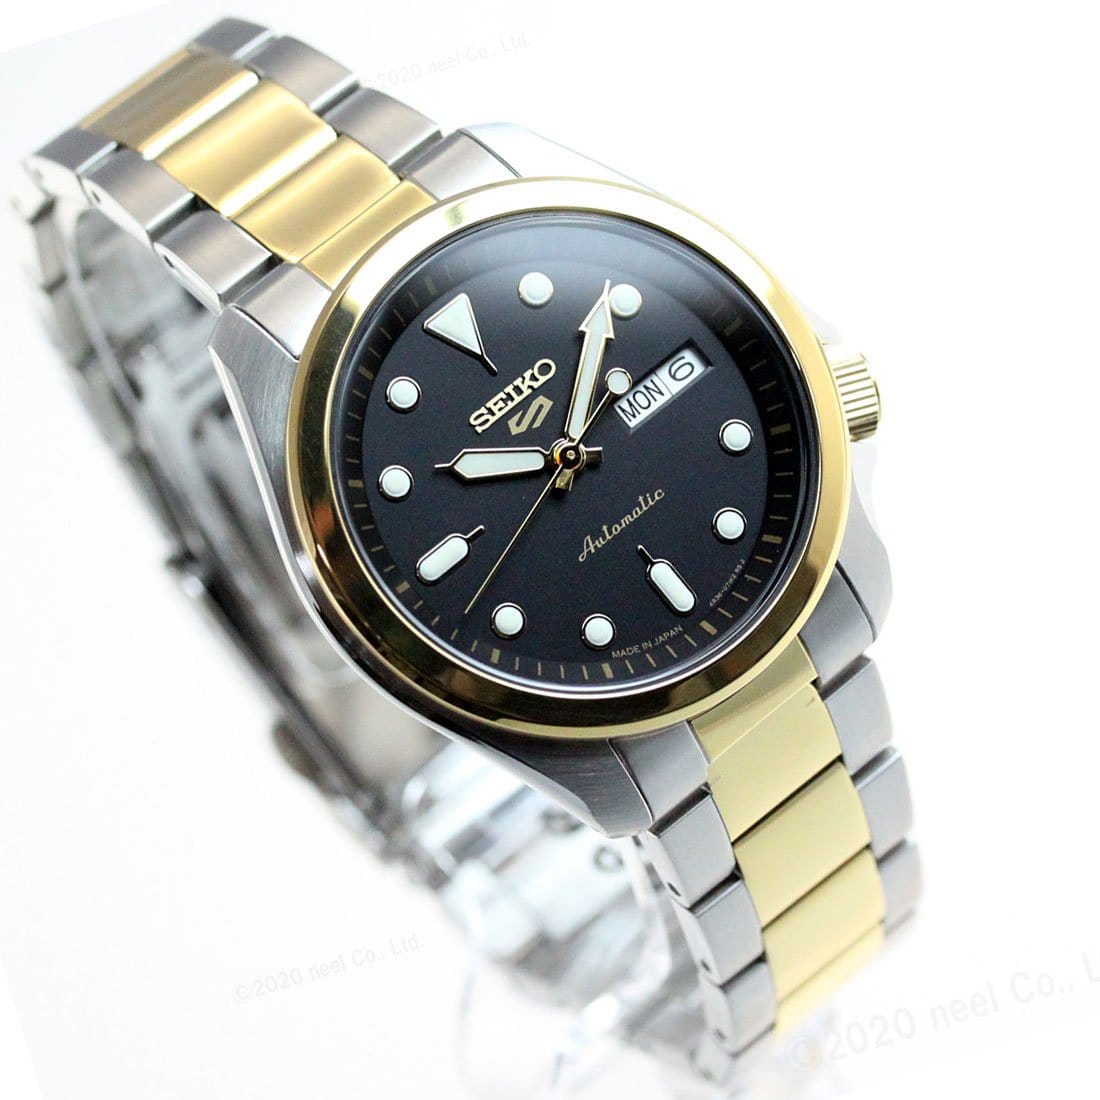 Seiko 5 Sports Automatic Two Tone Stainless Steel JDM Watch SBSA050